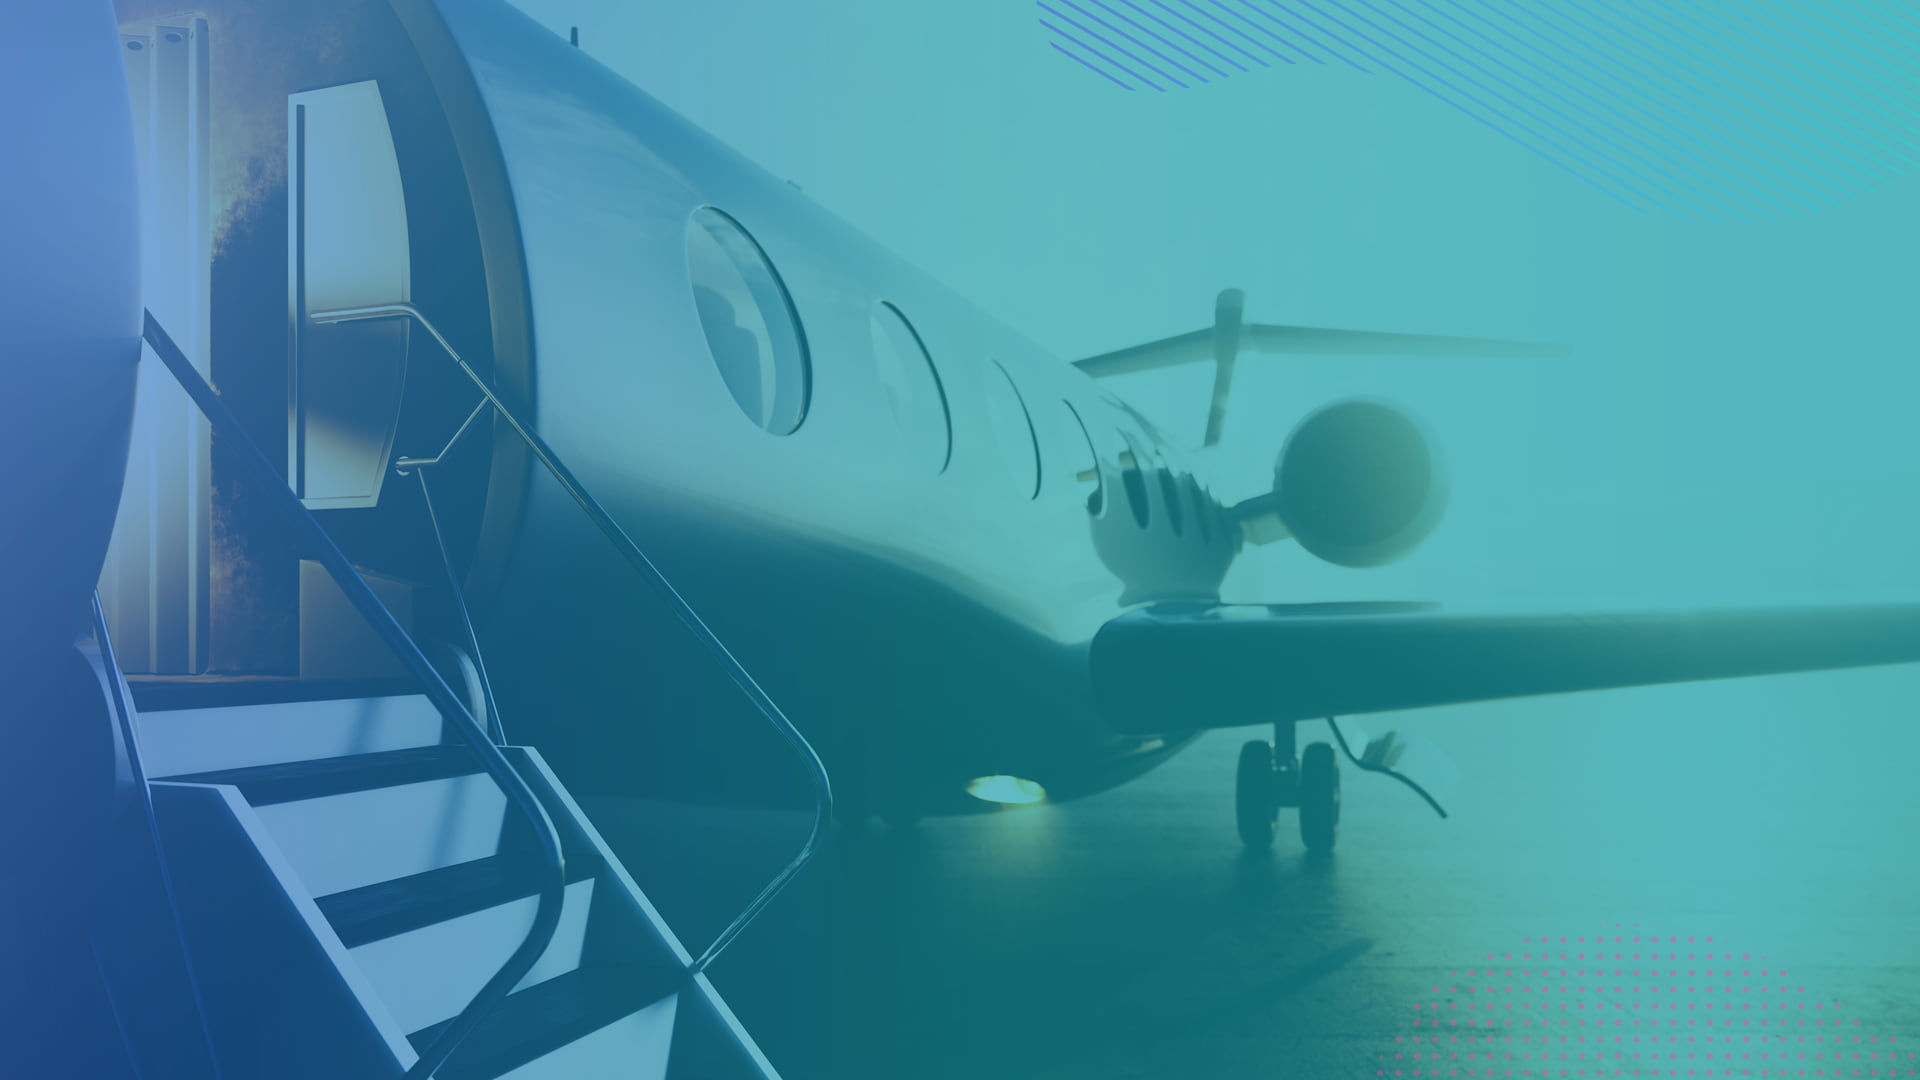 CUSTOM MOBILE BOOKING ENGINE APPLICATION FOR PRIVATE AIR TRAVEL INDUSTRY